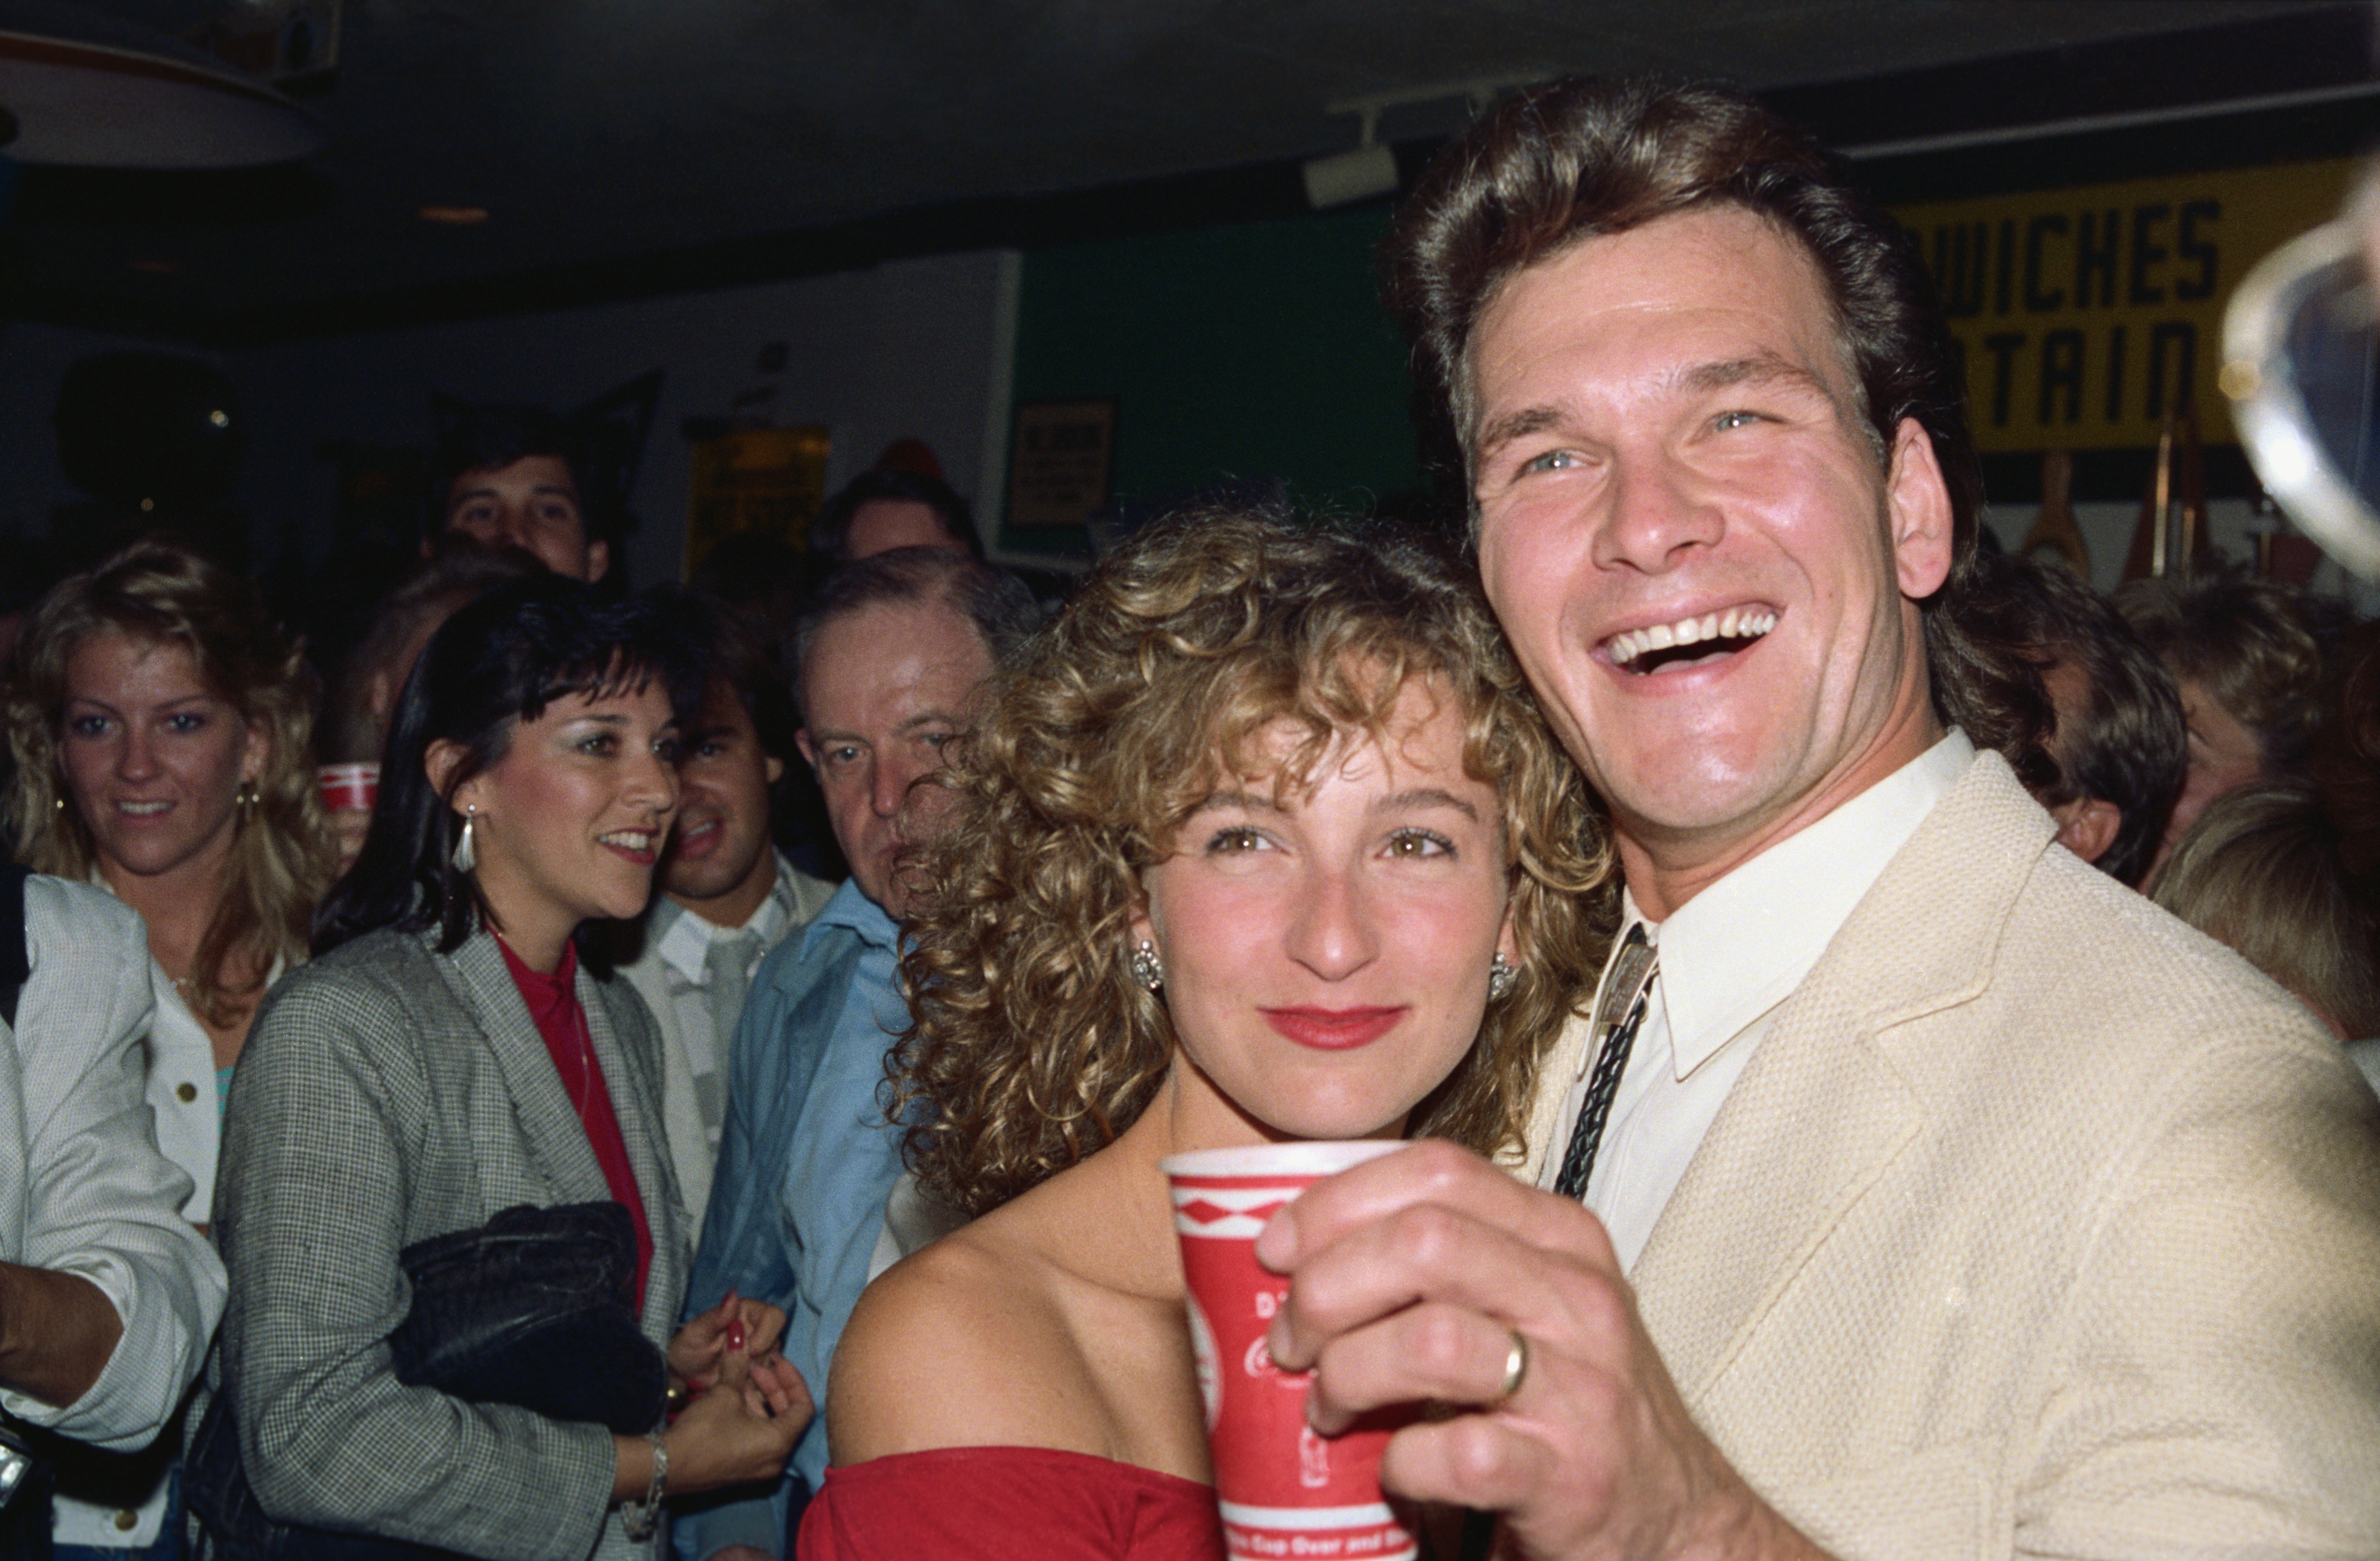 Jennifer Grey and Patrick Swayze at a party following the release of "Dirty Dancing" in 1987 | Source: Getty Images